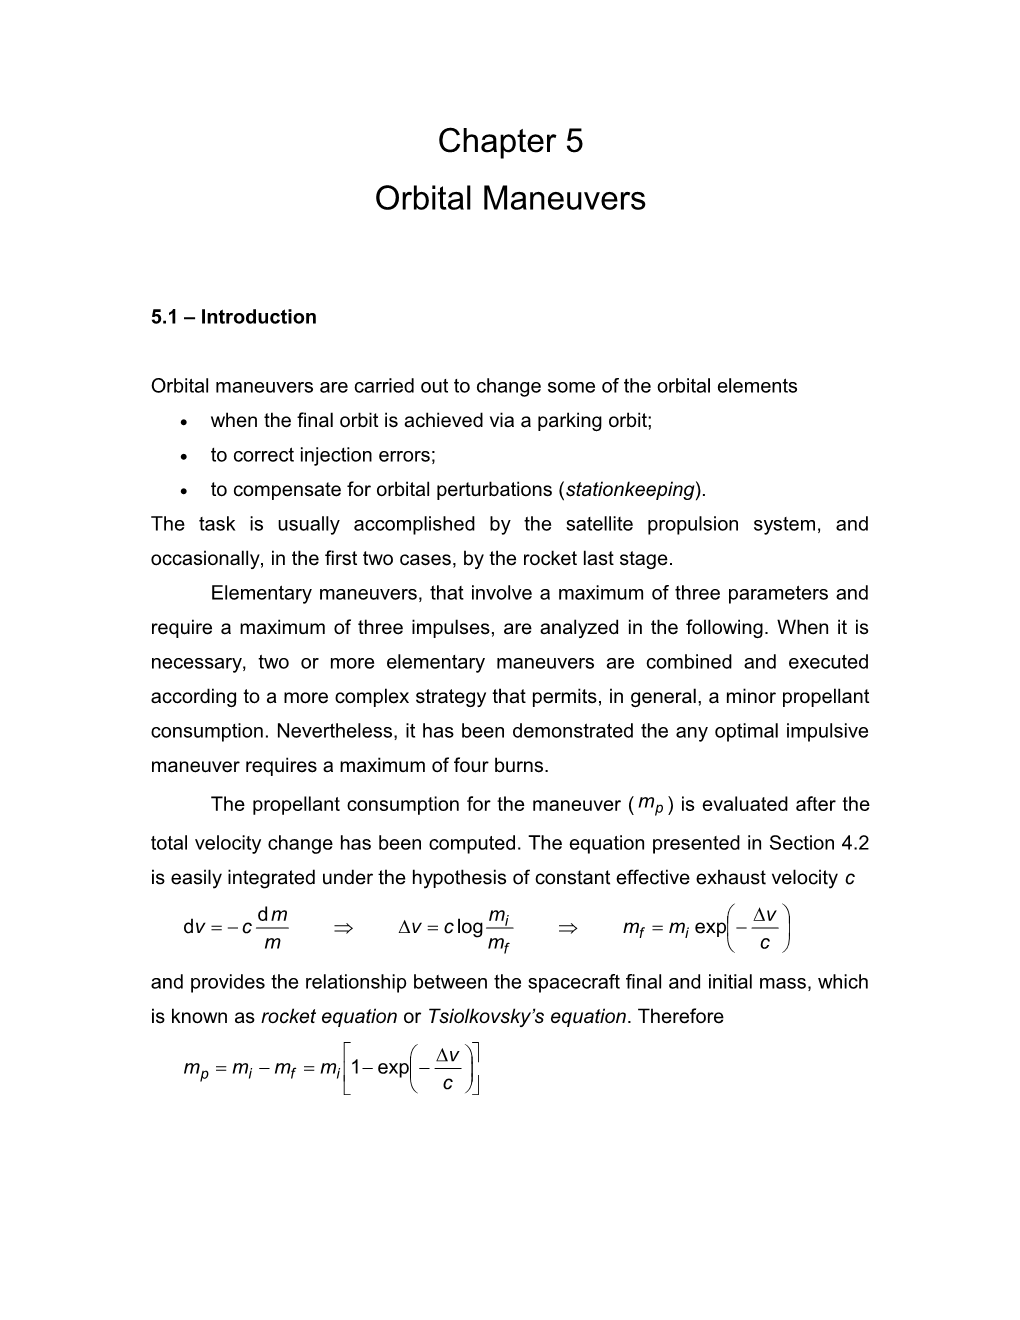 Orbital Maneuvers Are Carried out to Change Some of the Orbital Elements